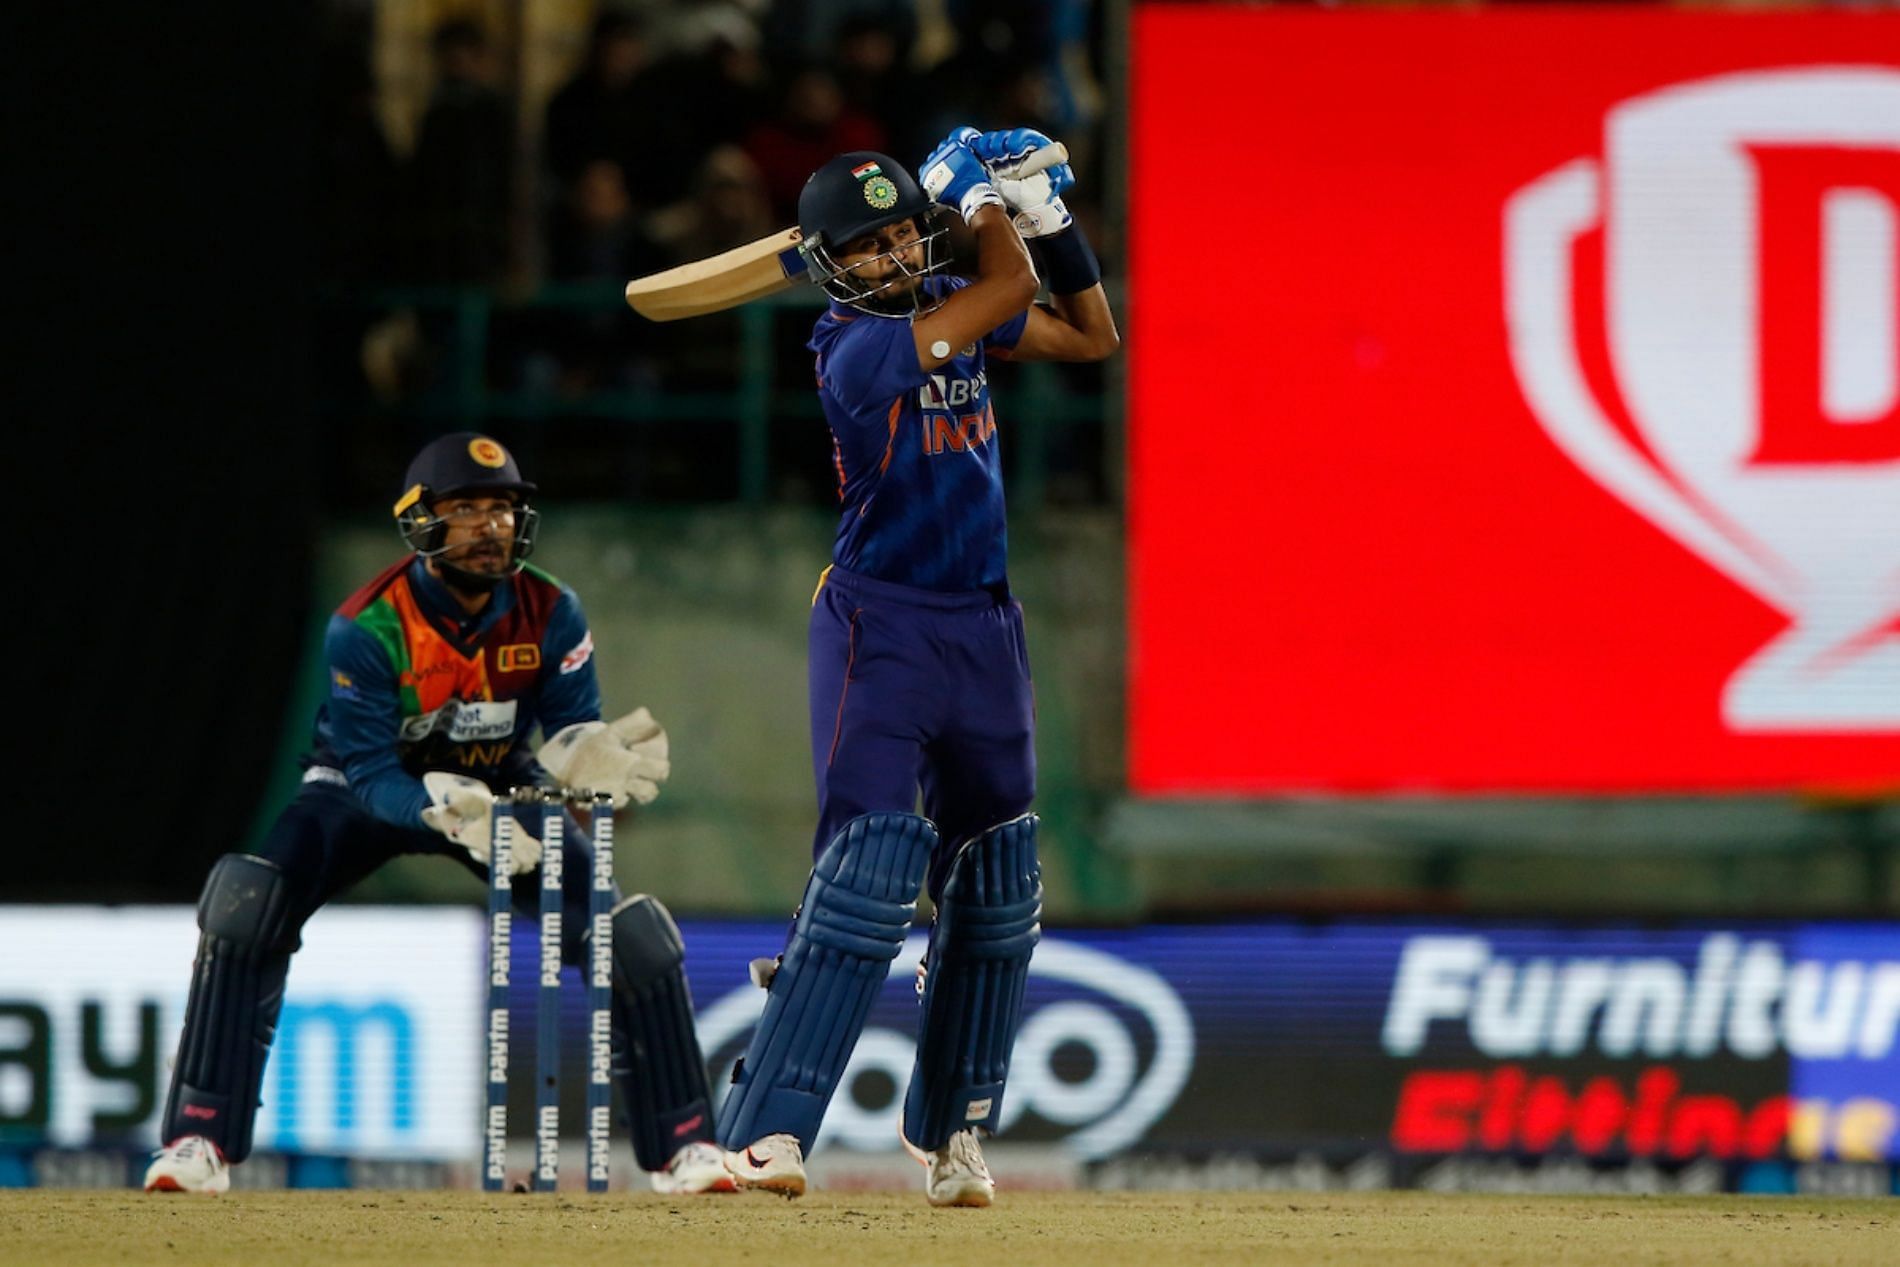 Team India display batting might to clinch T20I series over Sri Lanka with 7-wicket triumph